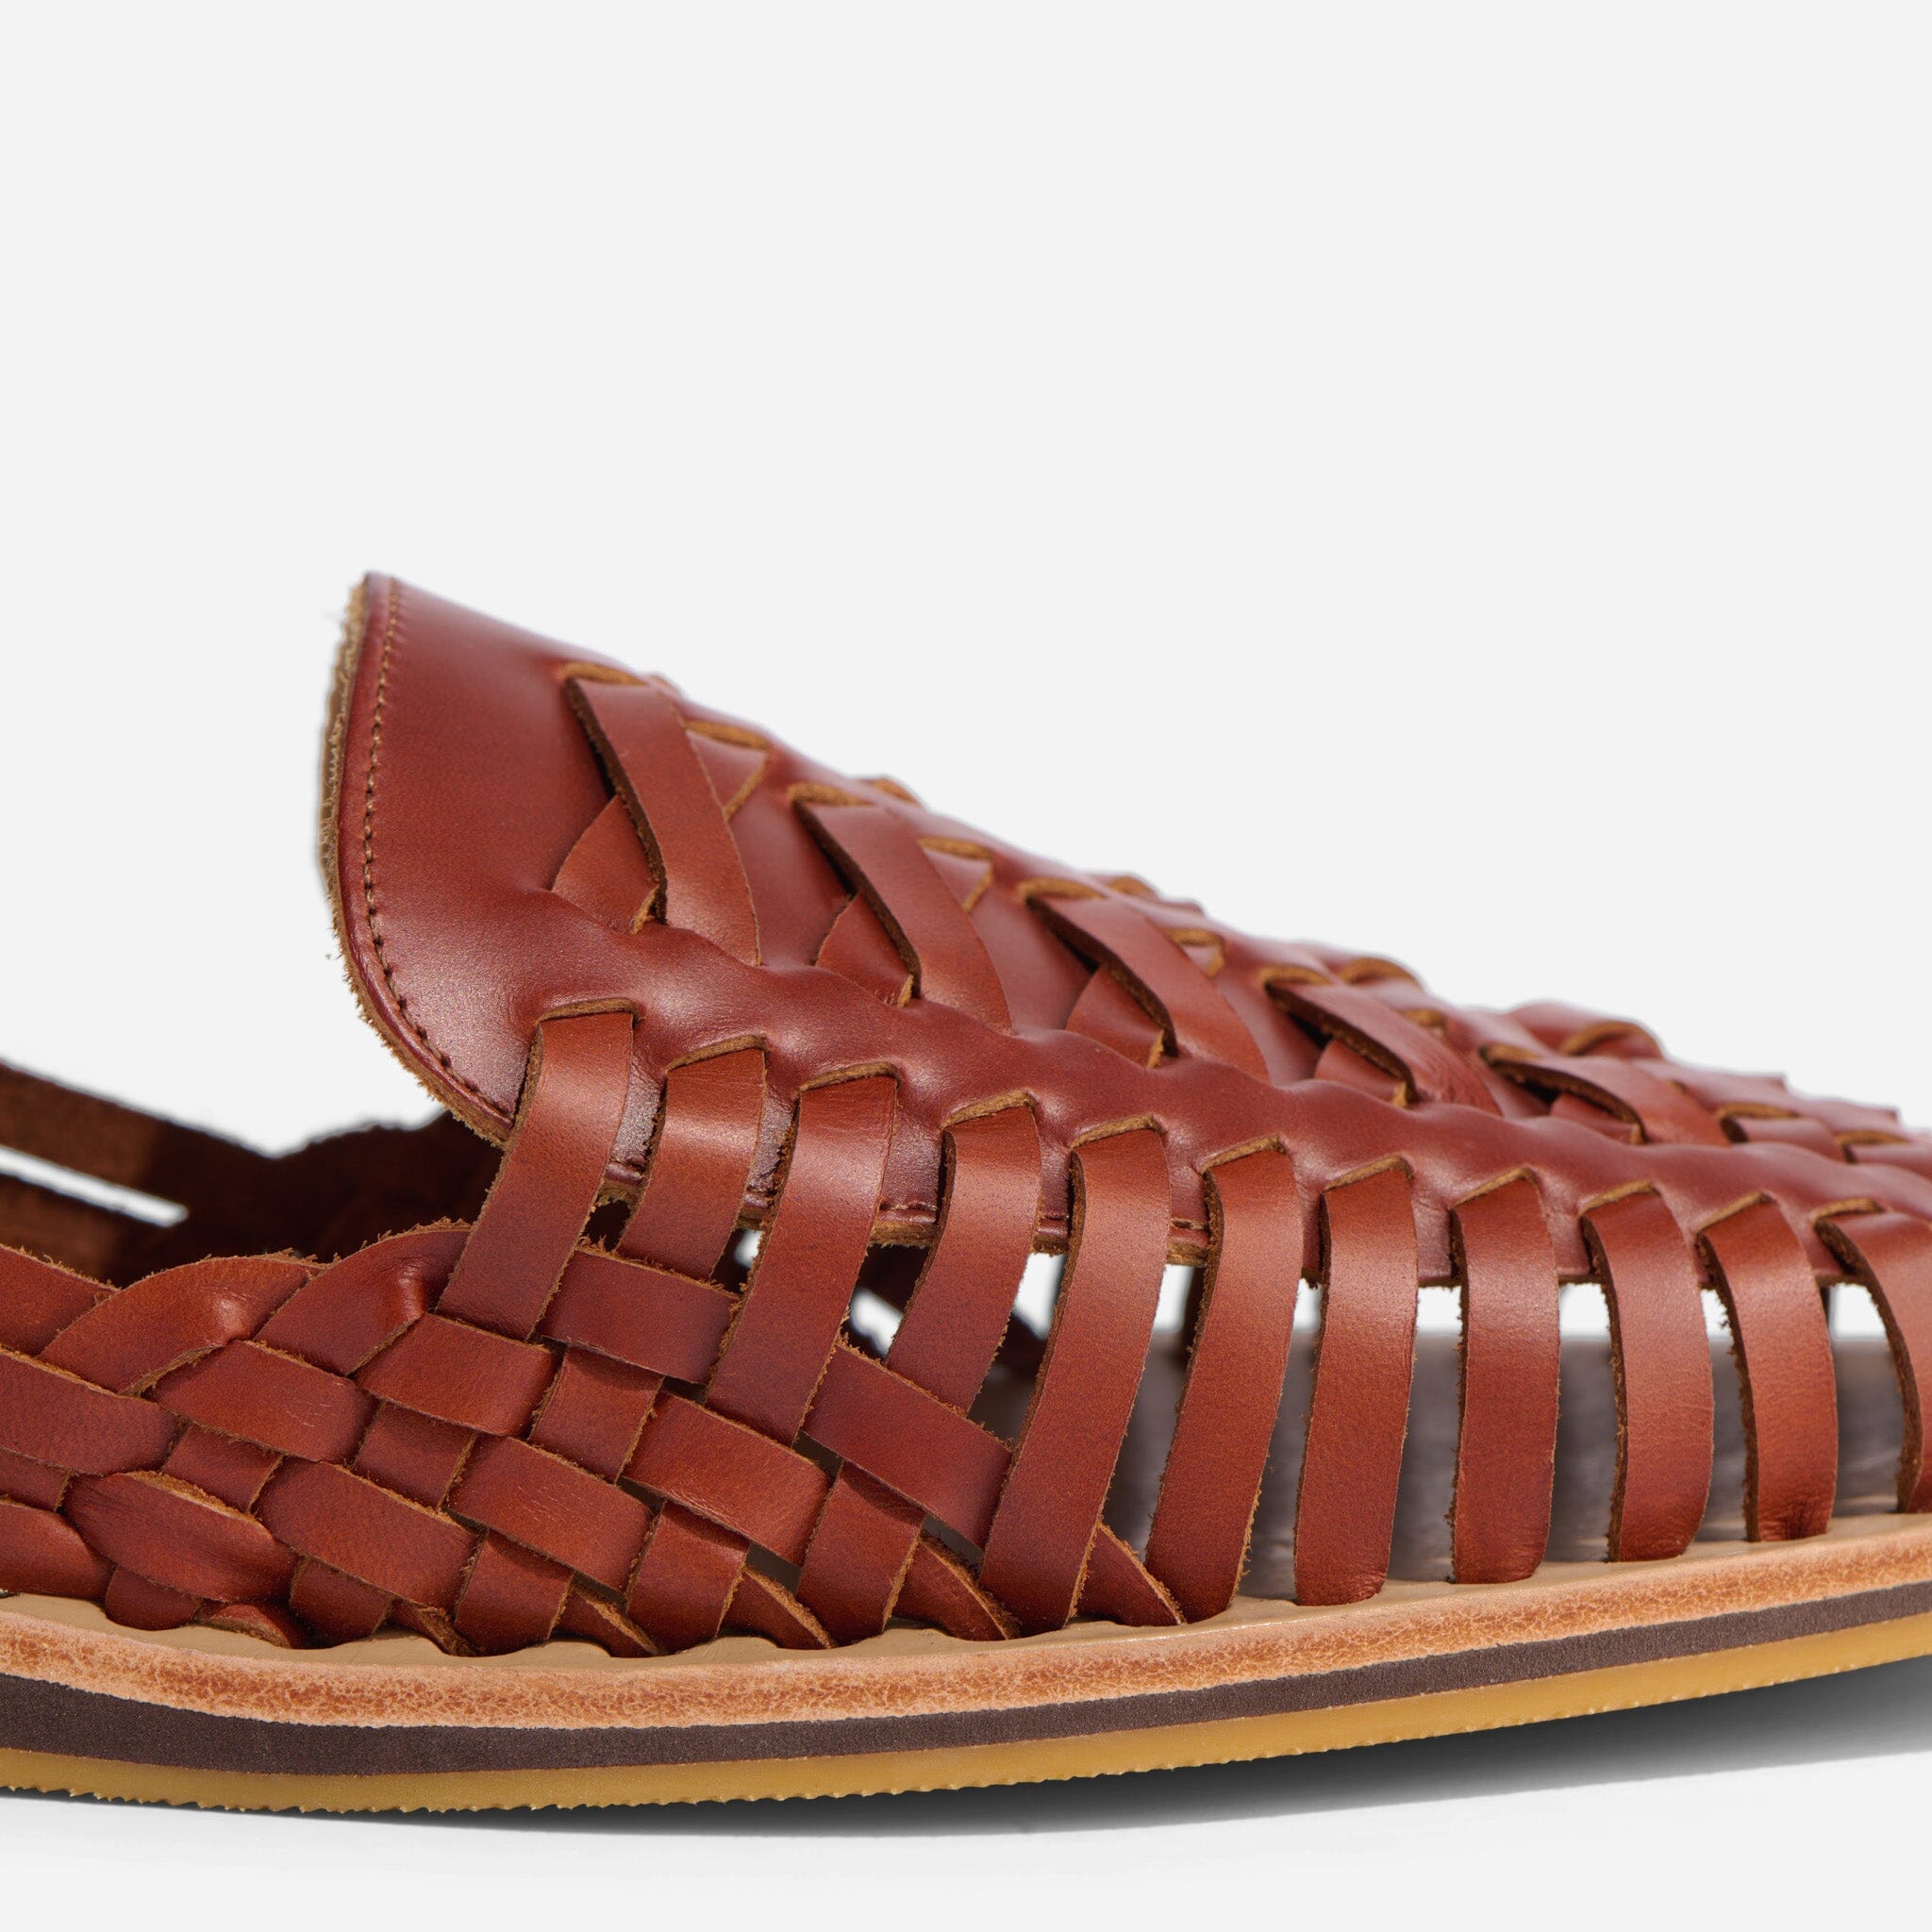 Men's Huarache Sandal, Handcrafted & Ethically Made